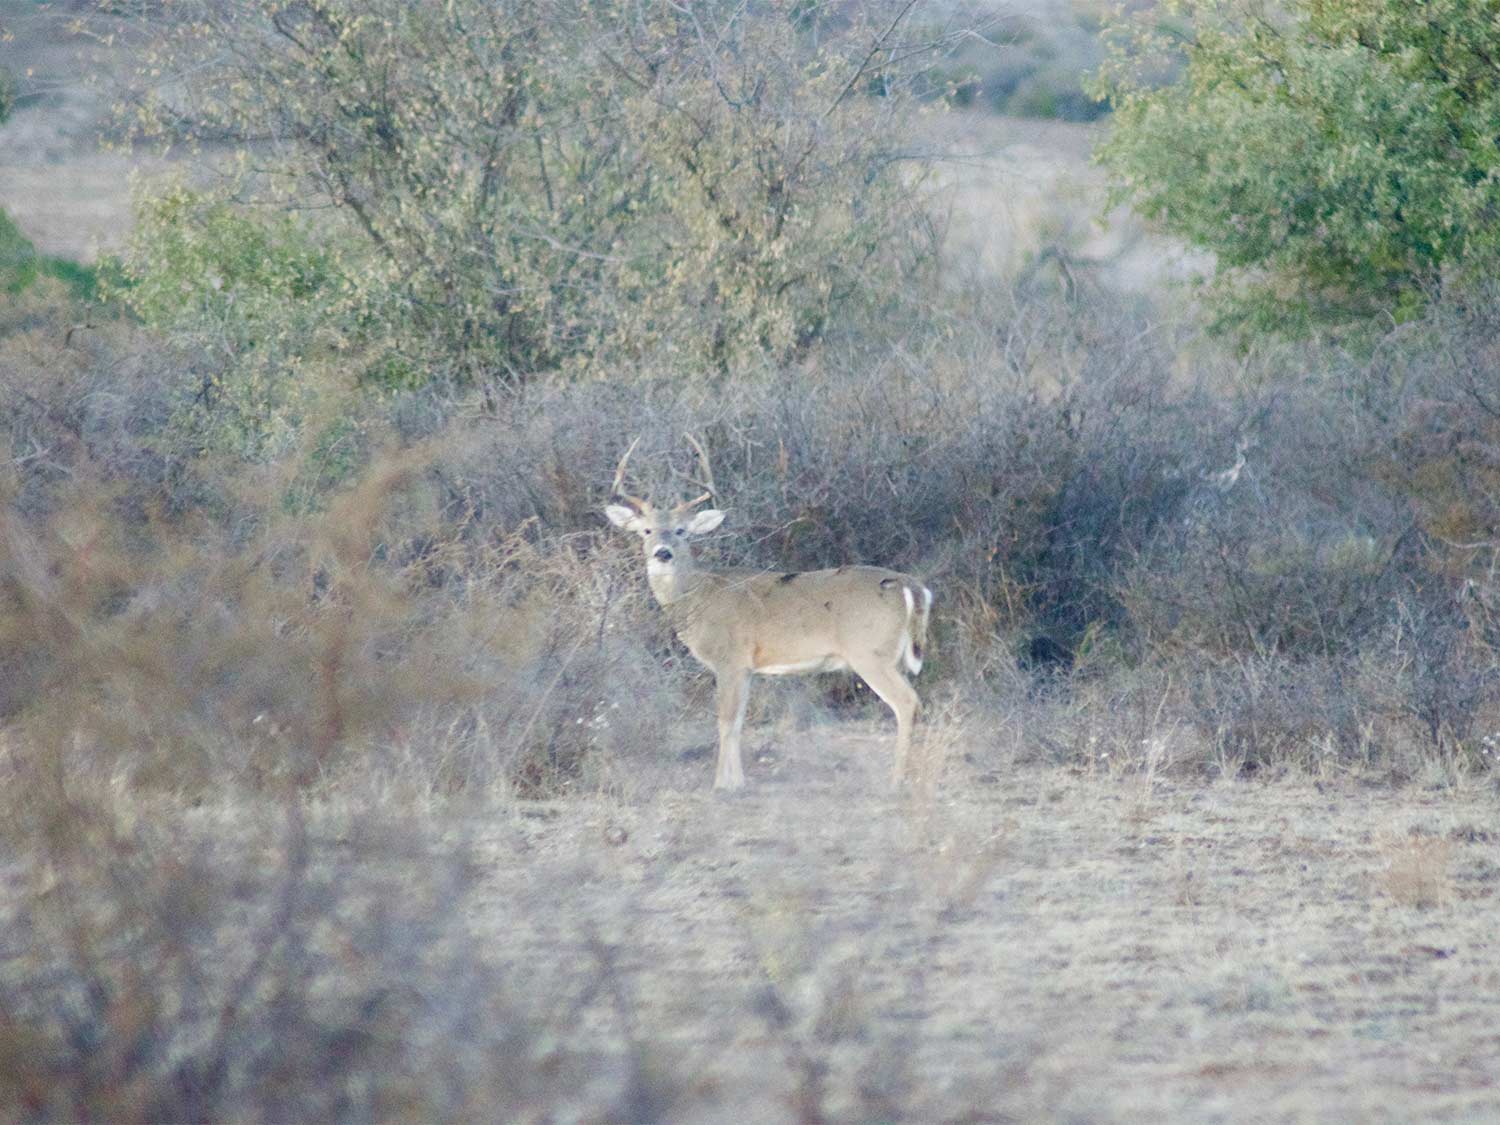 A whitetail deer stands in a large dry field in the western backcountry.